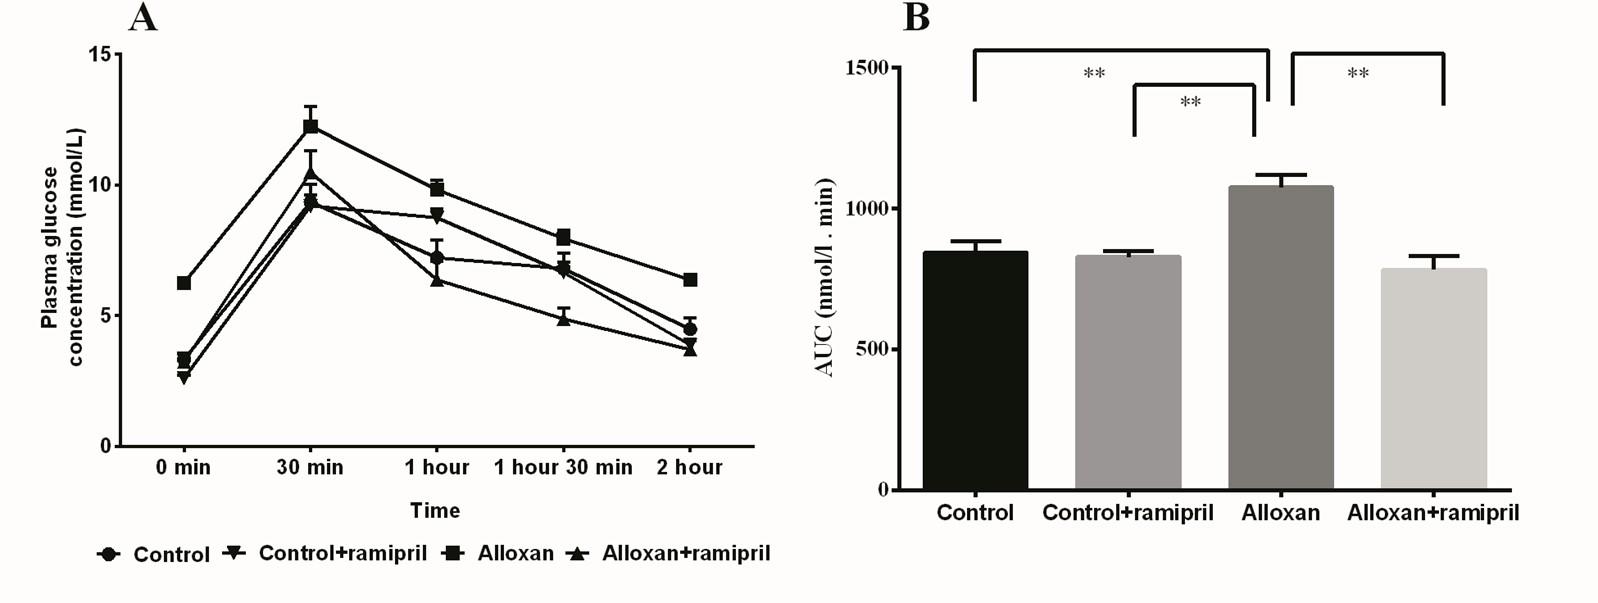 Ramipril, an angiotensin-converting enzyme inhibitor ameliorates oxidative stress, inflammation, and hepatic fibrosis in alloxan-induced diabetic rats